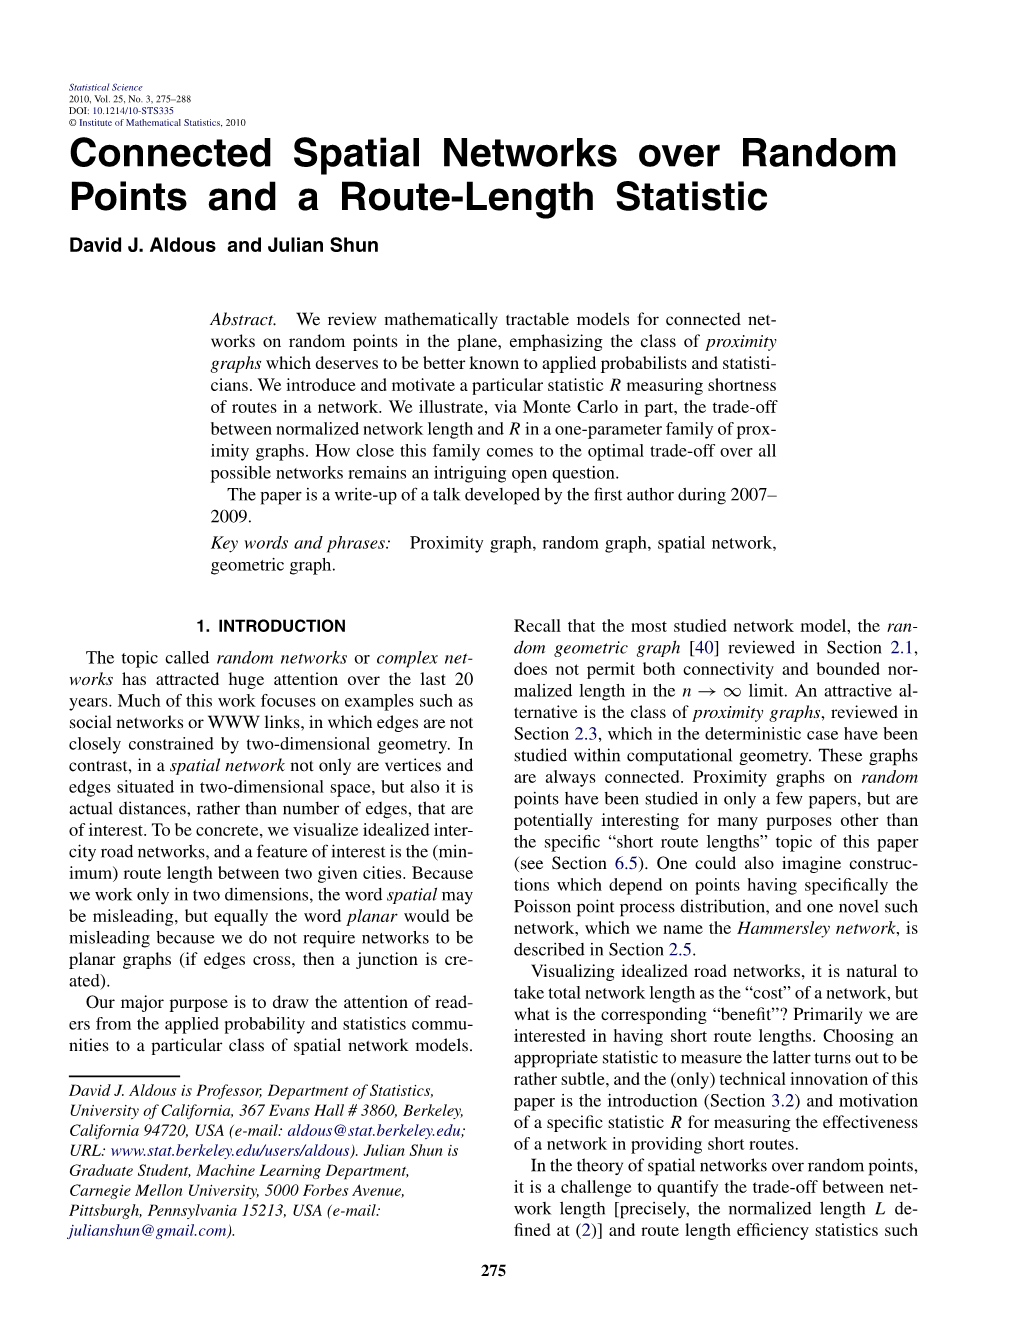 Connected Spatial Networks Over Random Points and a Route-Length Statistic David J